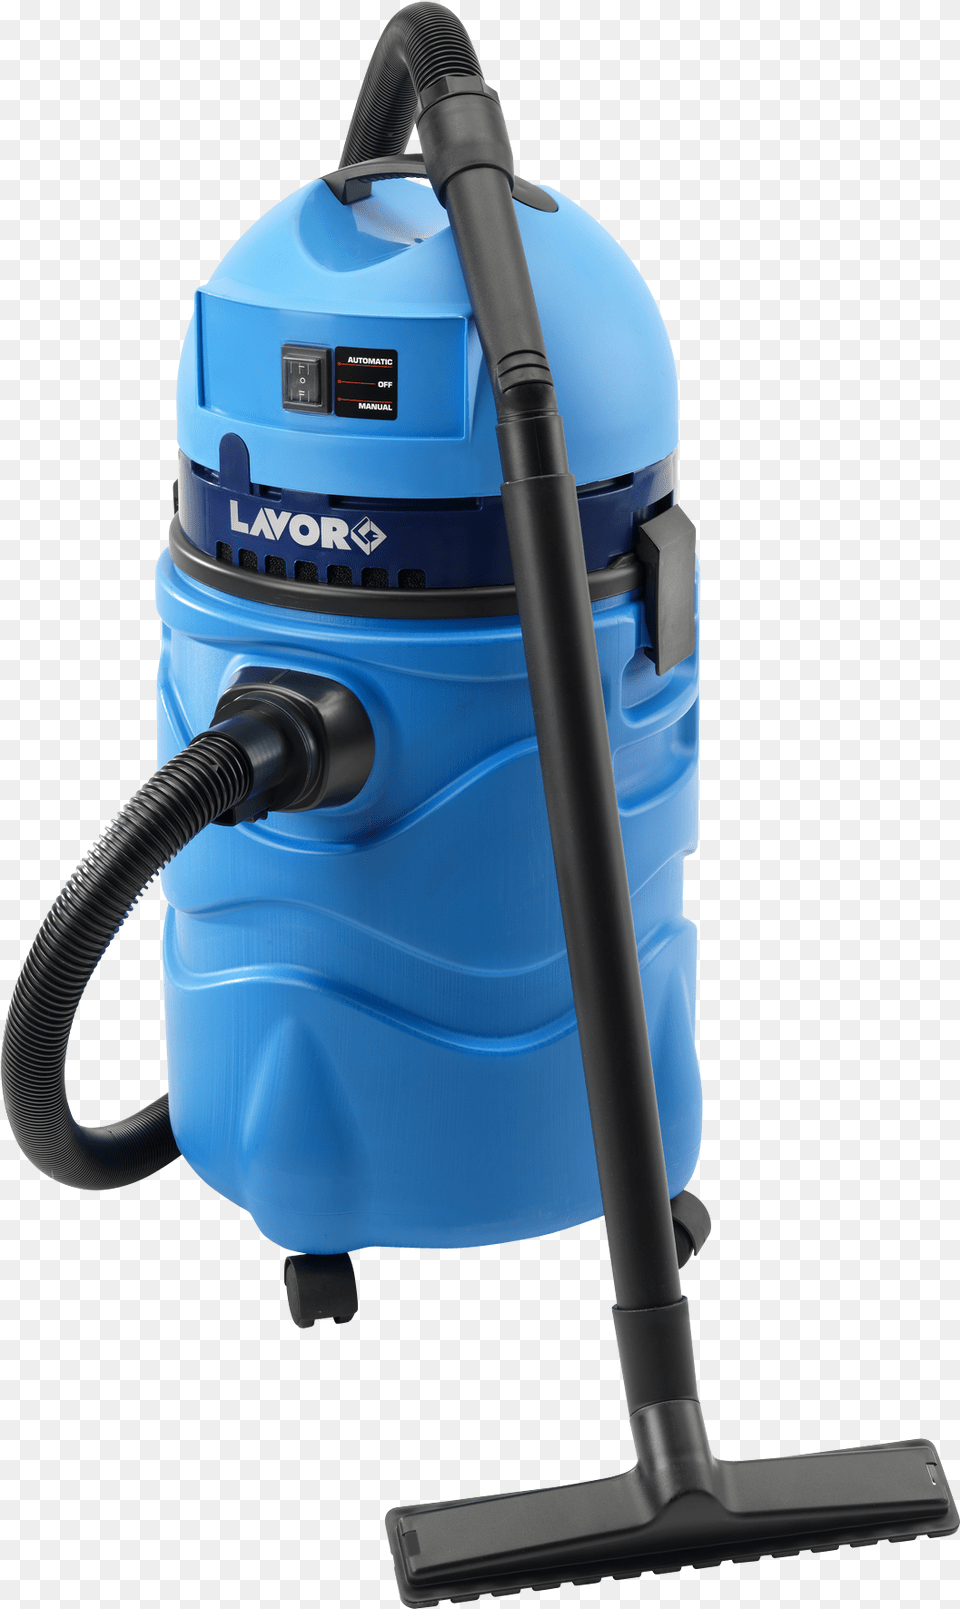 Blue Vacuum Cleaner Lavor Swimmy, Appliance, Device, Electrical Device, Vacuum Cleaner Png Image